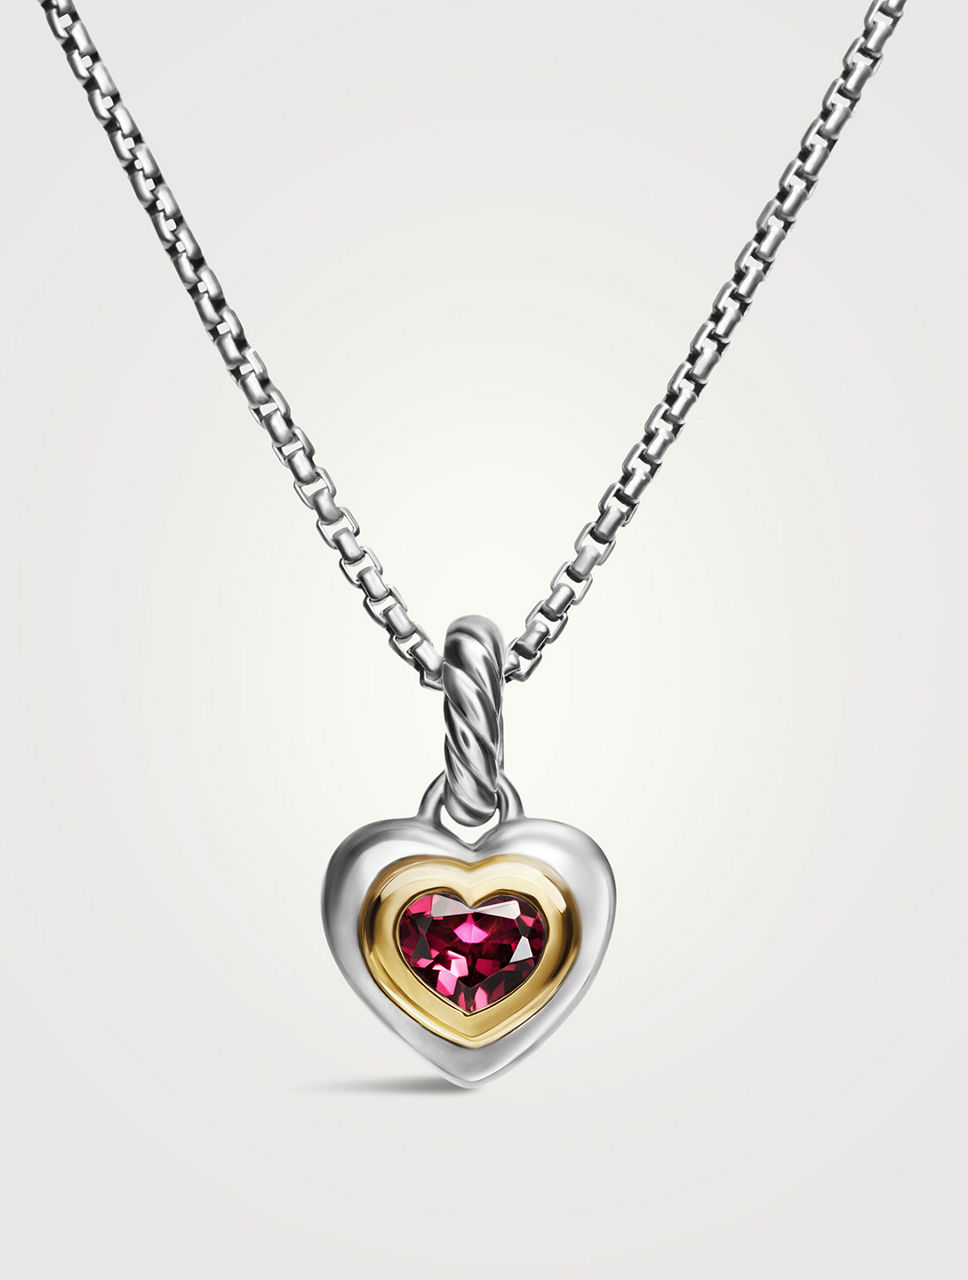 Petite Cable Heart Pendant Necklace In Sterling Silver With 14k Yellow Gold And Rhodolite Garnet, 17.1mm